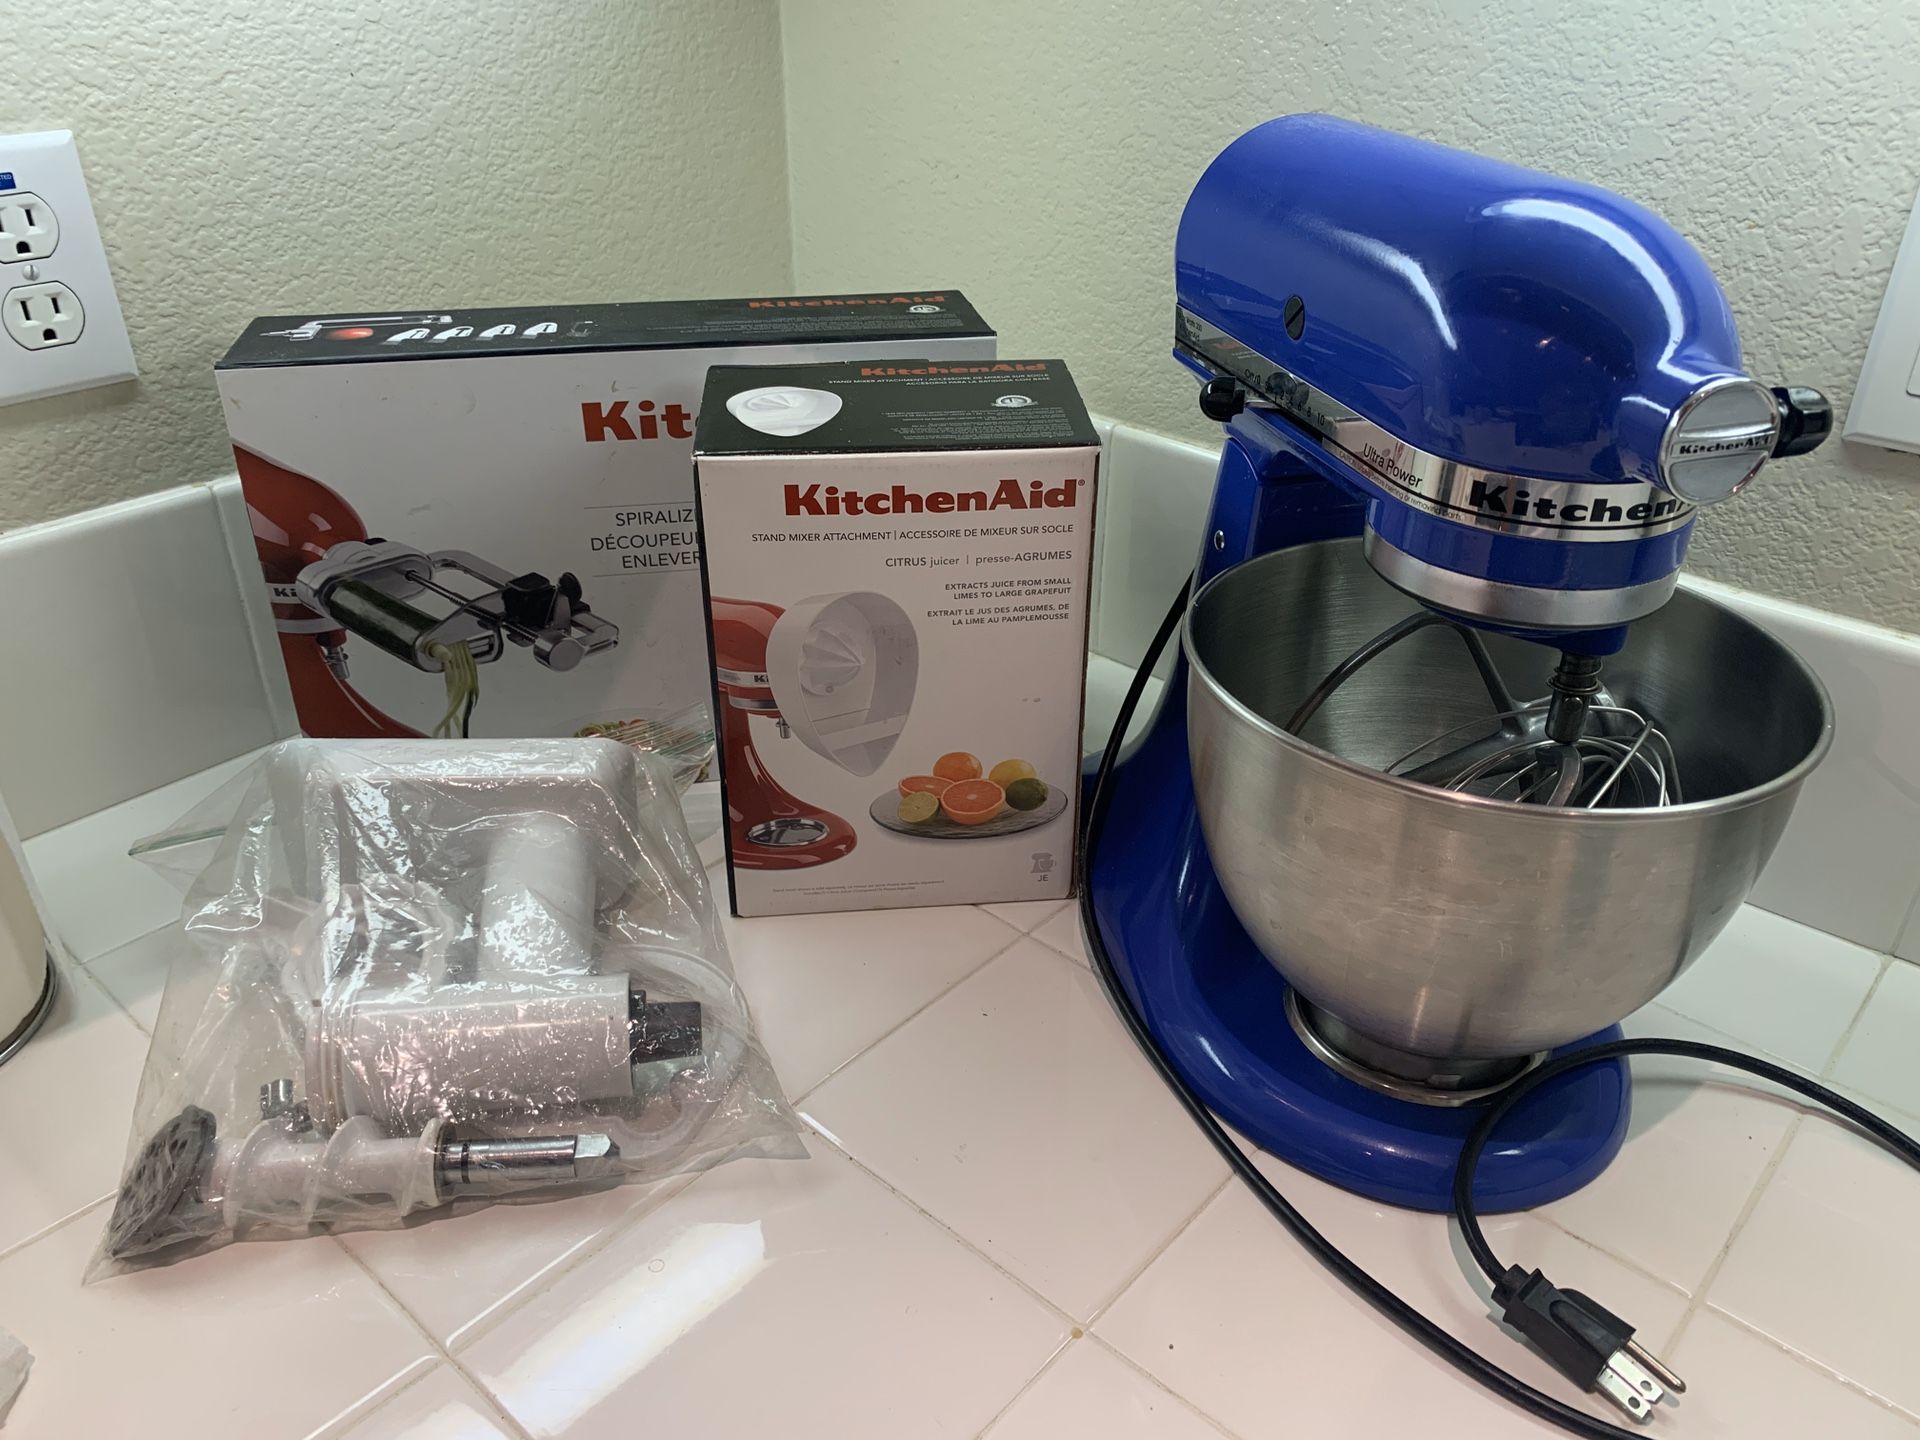 Kitchen Aid Mixer with attachments (grinder, juicer, peeler)